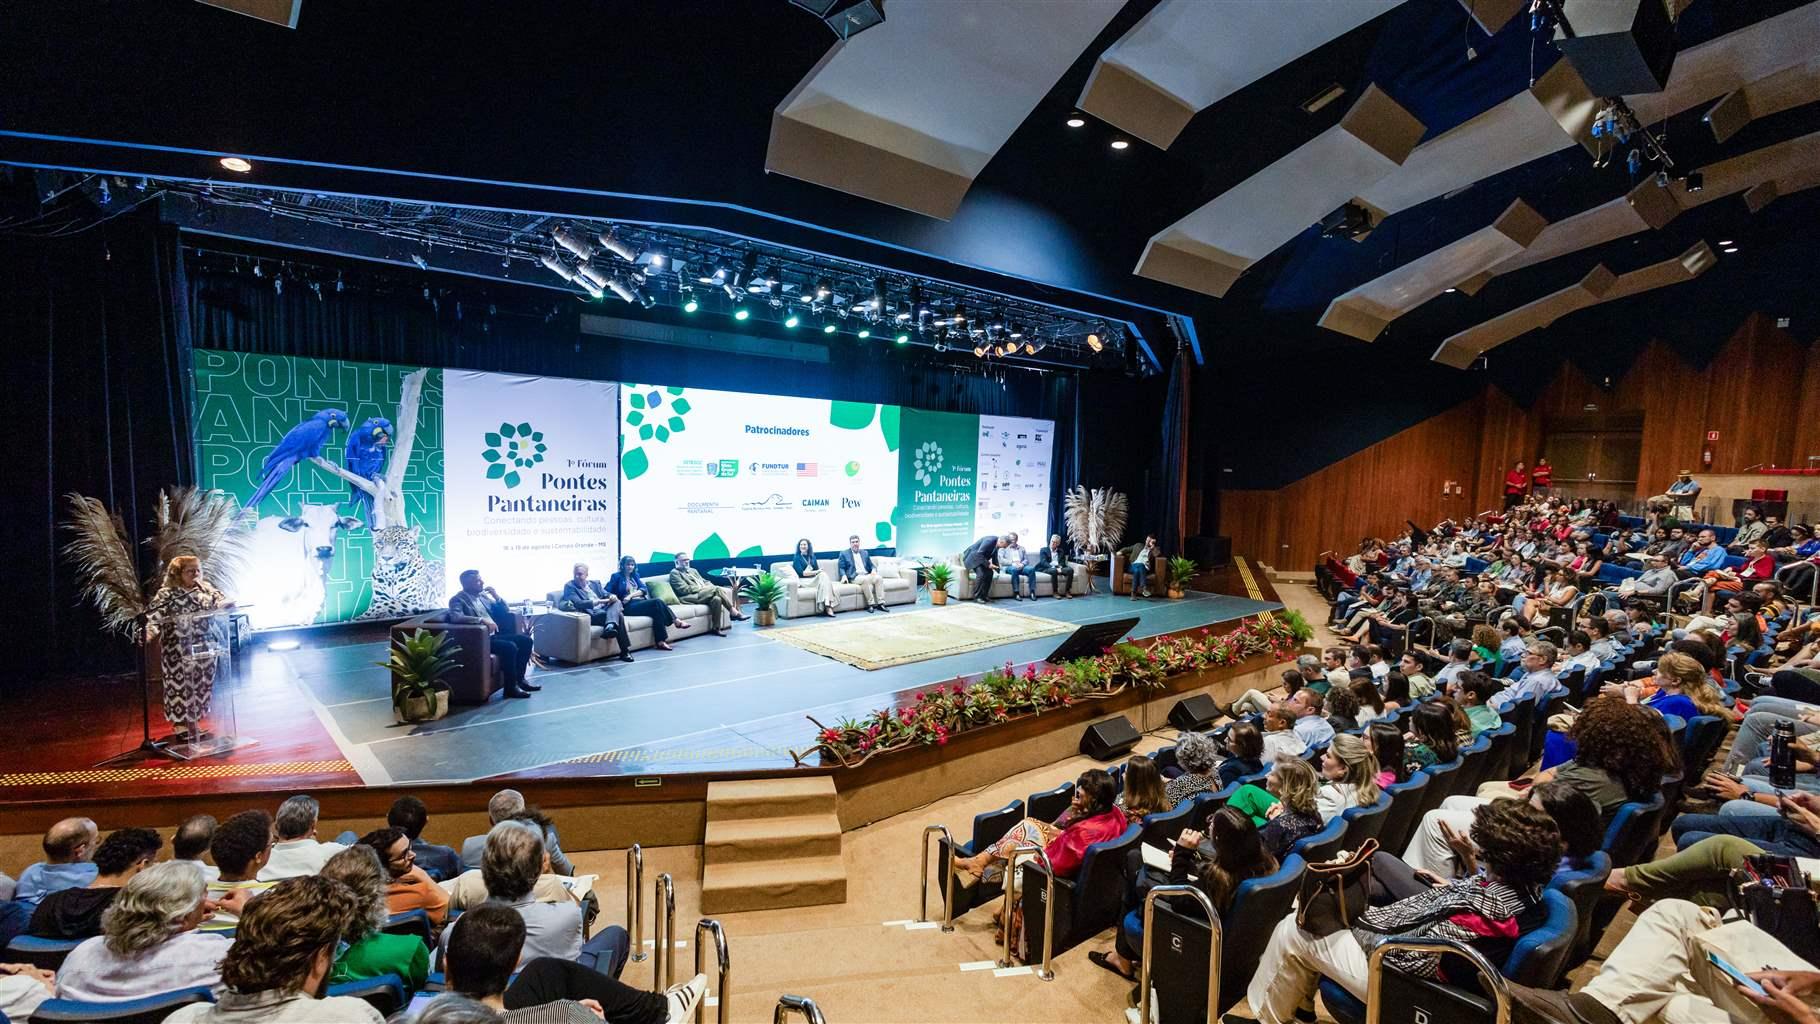 Hundreds of people sit in a large auditorium watching a panel discussion with 10 participants onstage. A large screen behind the panelists features a photo of blue and yellow macaws, a jaguar, and a cow, while others announce the title of the meeting and a list of its sponsors.